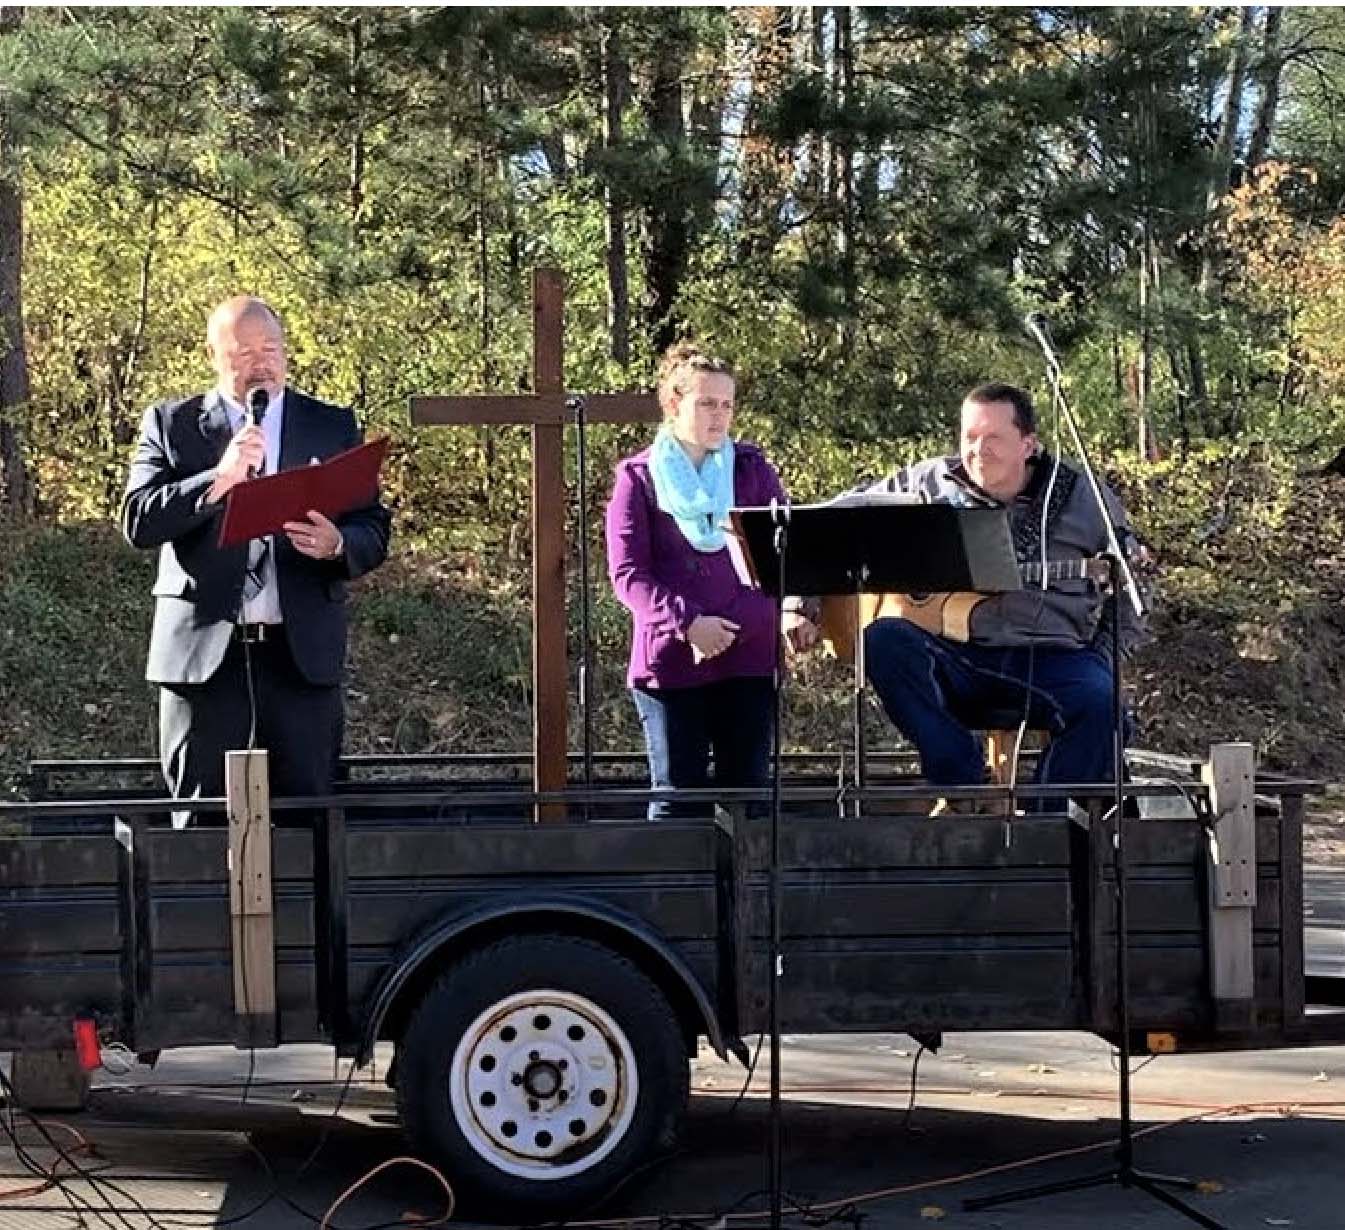 Mark Gass leading worship outdoors in a trailer